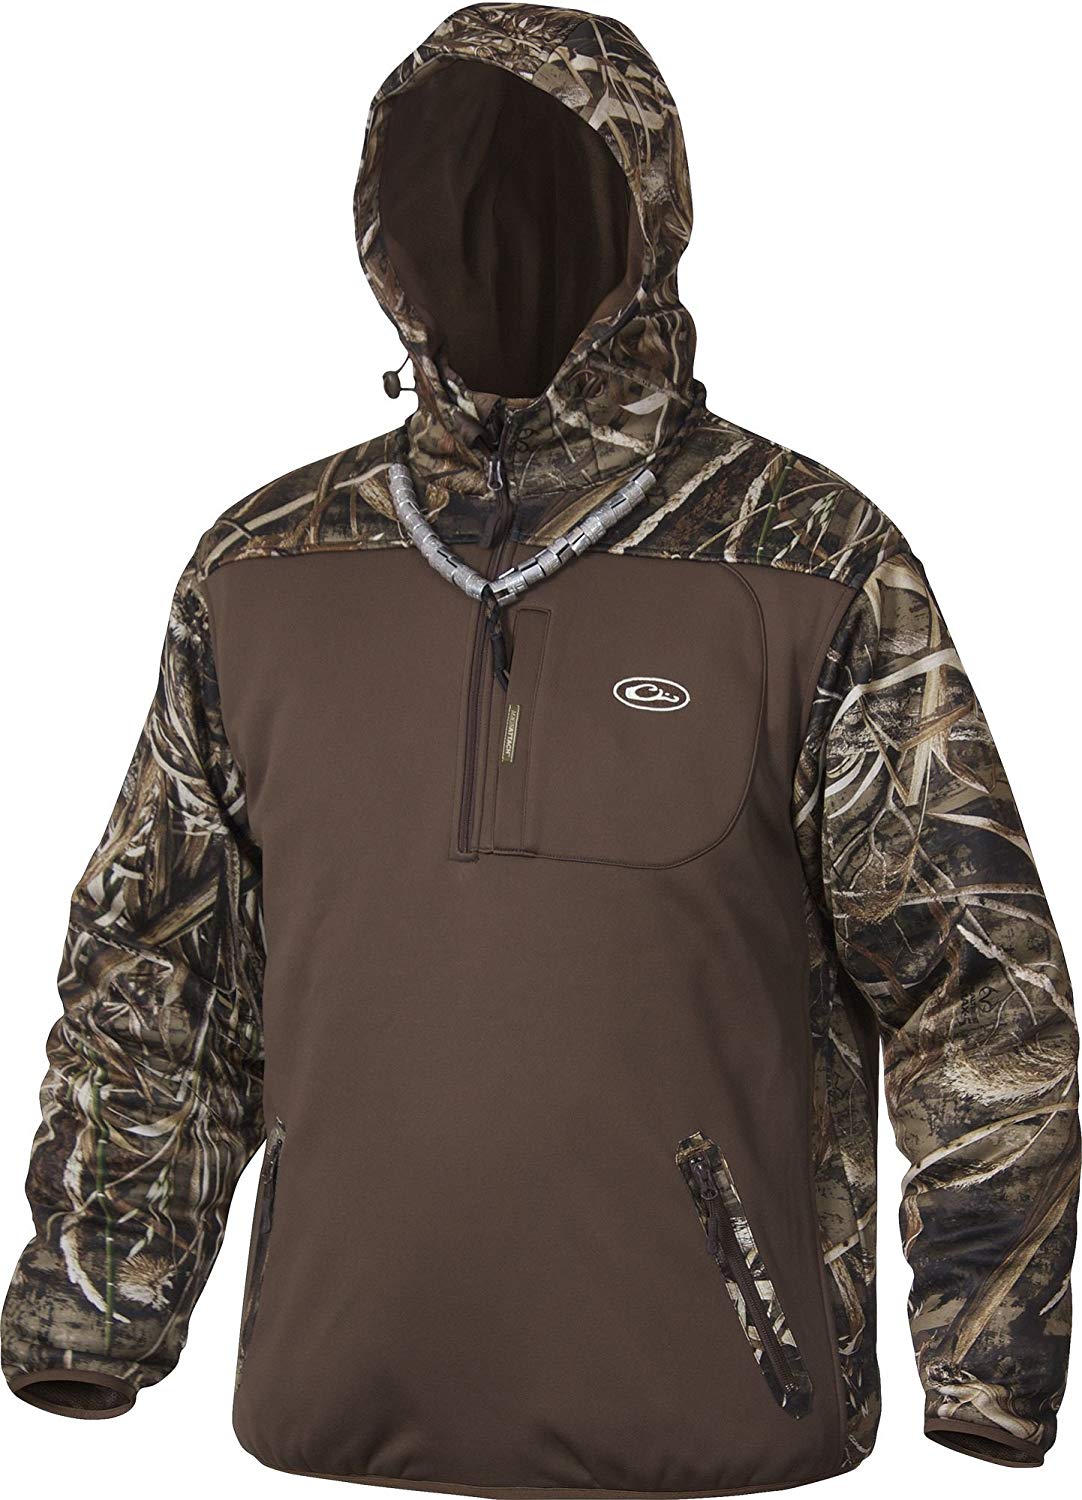 buy hunting clothing & apparel at cheap rate in bulk. wholesale & retail sporting supplies store.